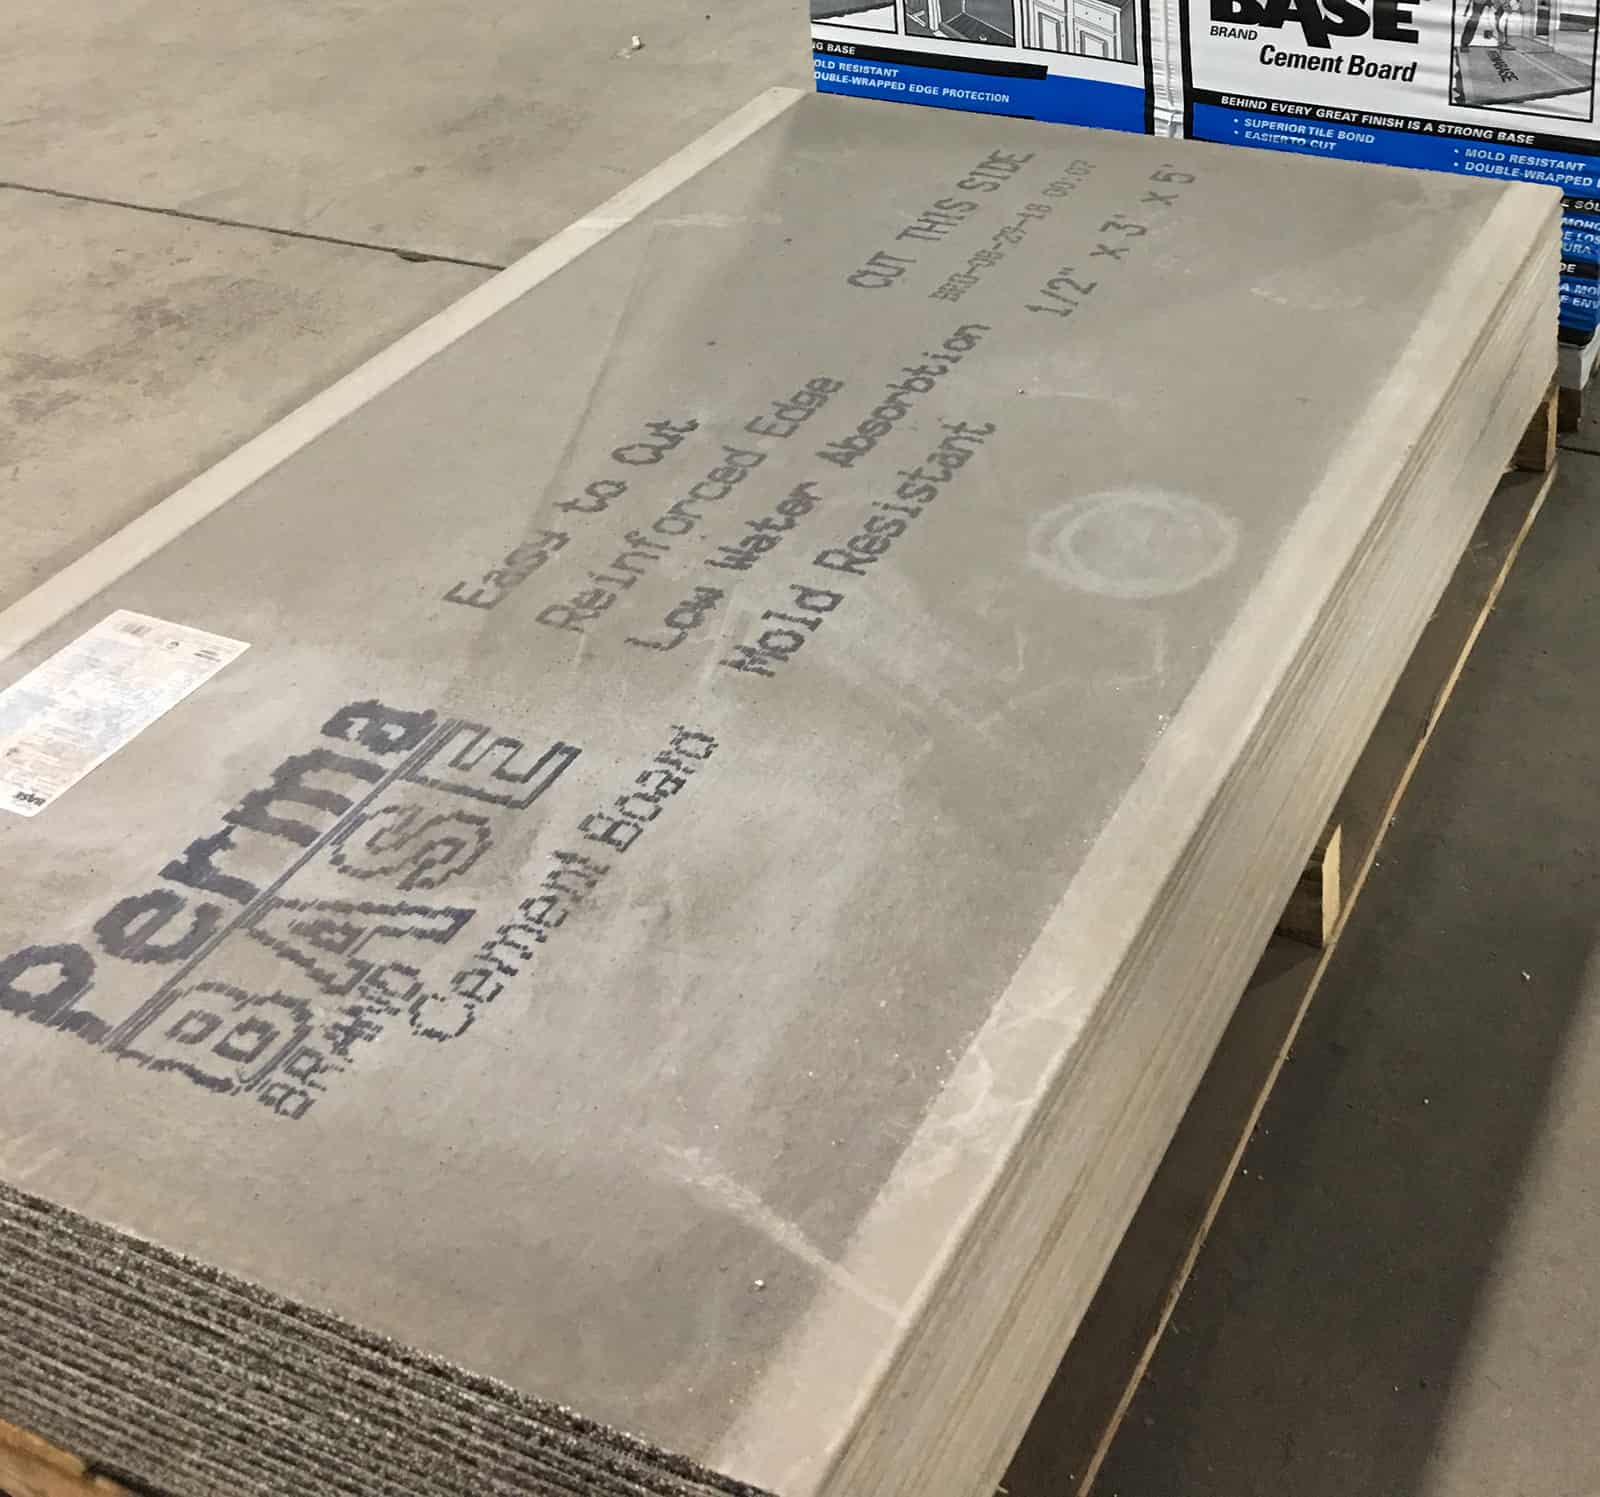 PermaBase 0.5 Inch Cement Board 3' x 5' Sheet - Stoneyard®